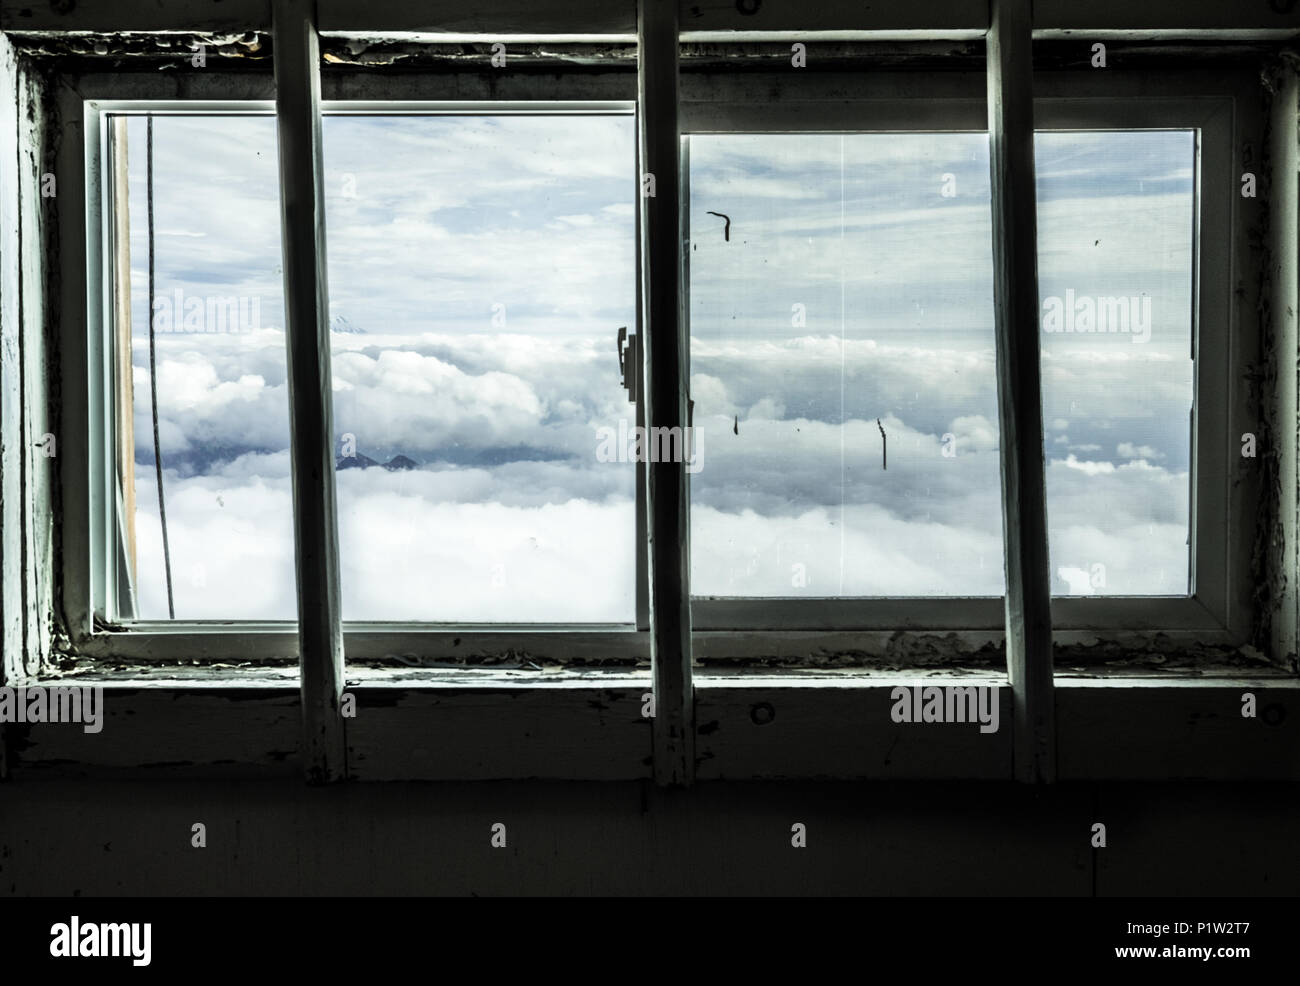 Decrepit old window with a view of a sea of clouds Stock Photo